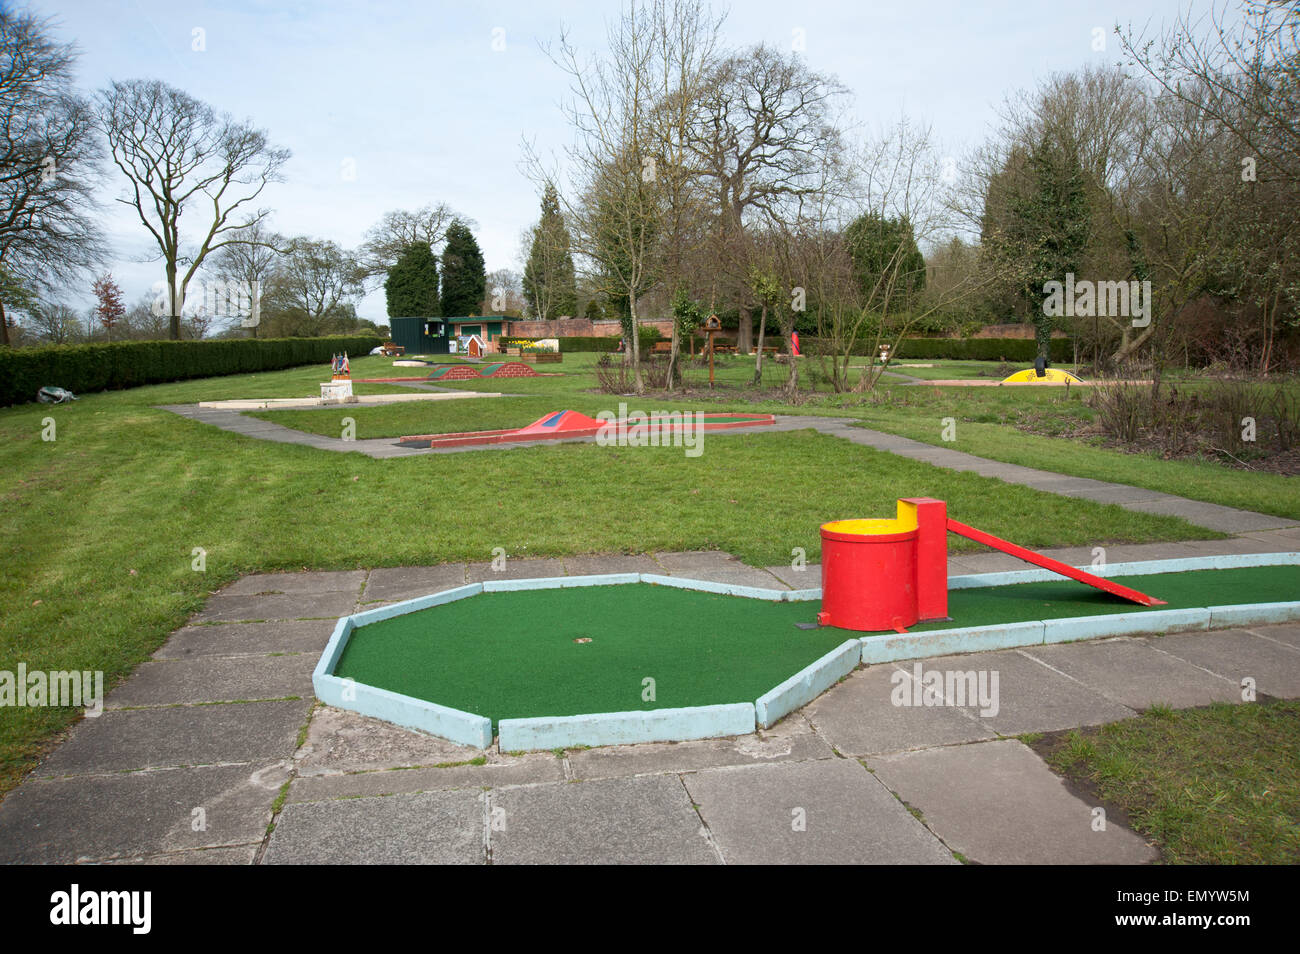 Crazy Golf Course High Resolution Stock Photography and Images - Alamy